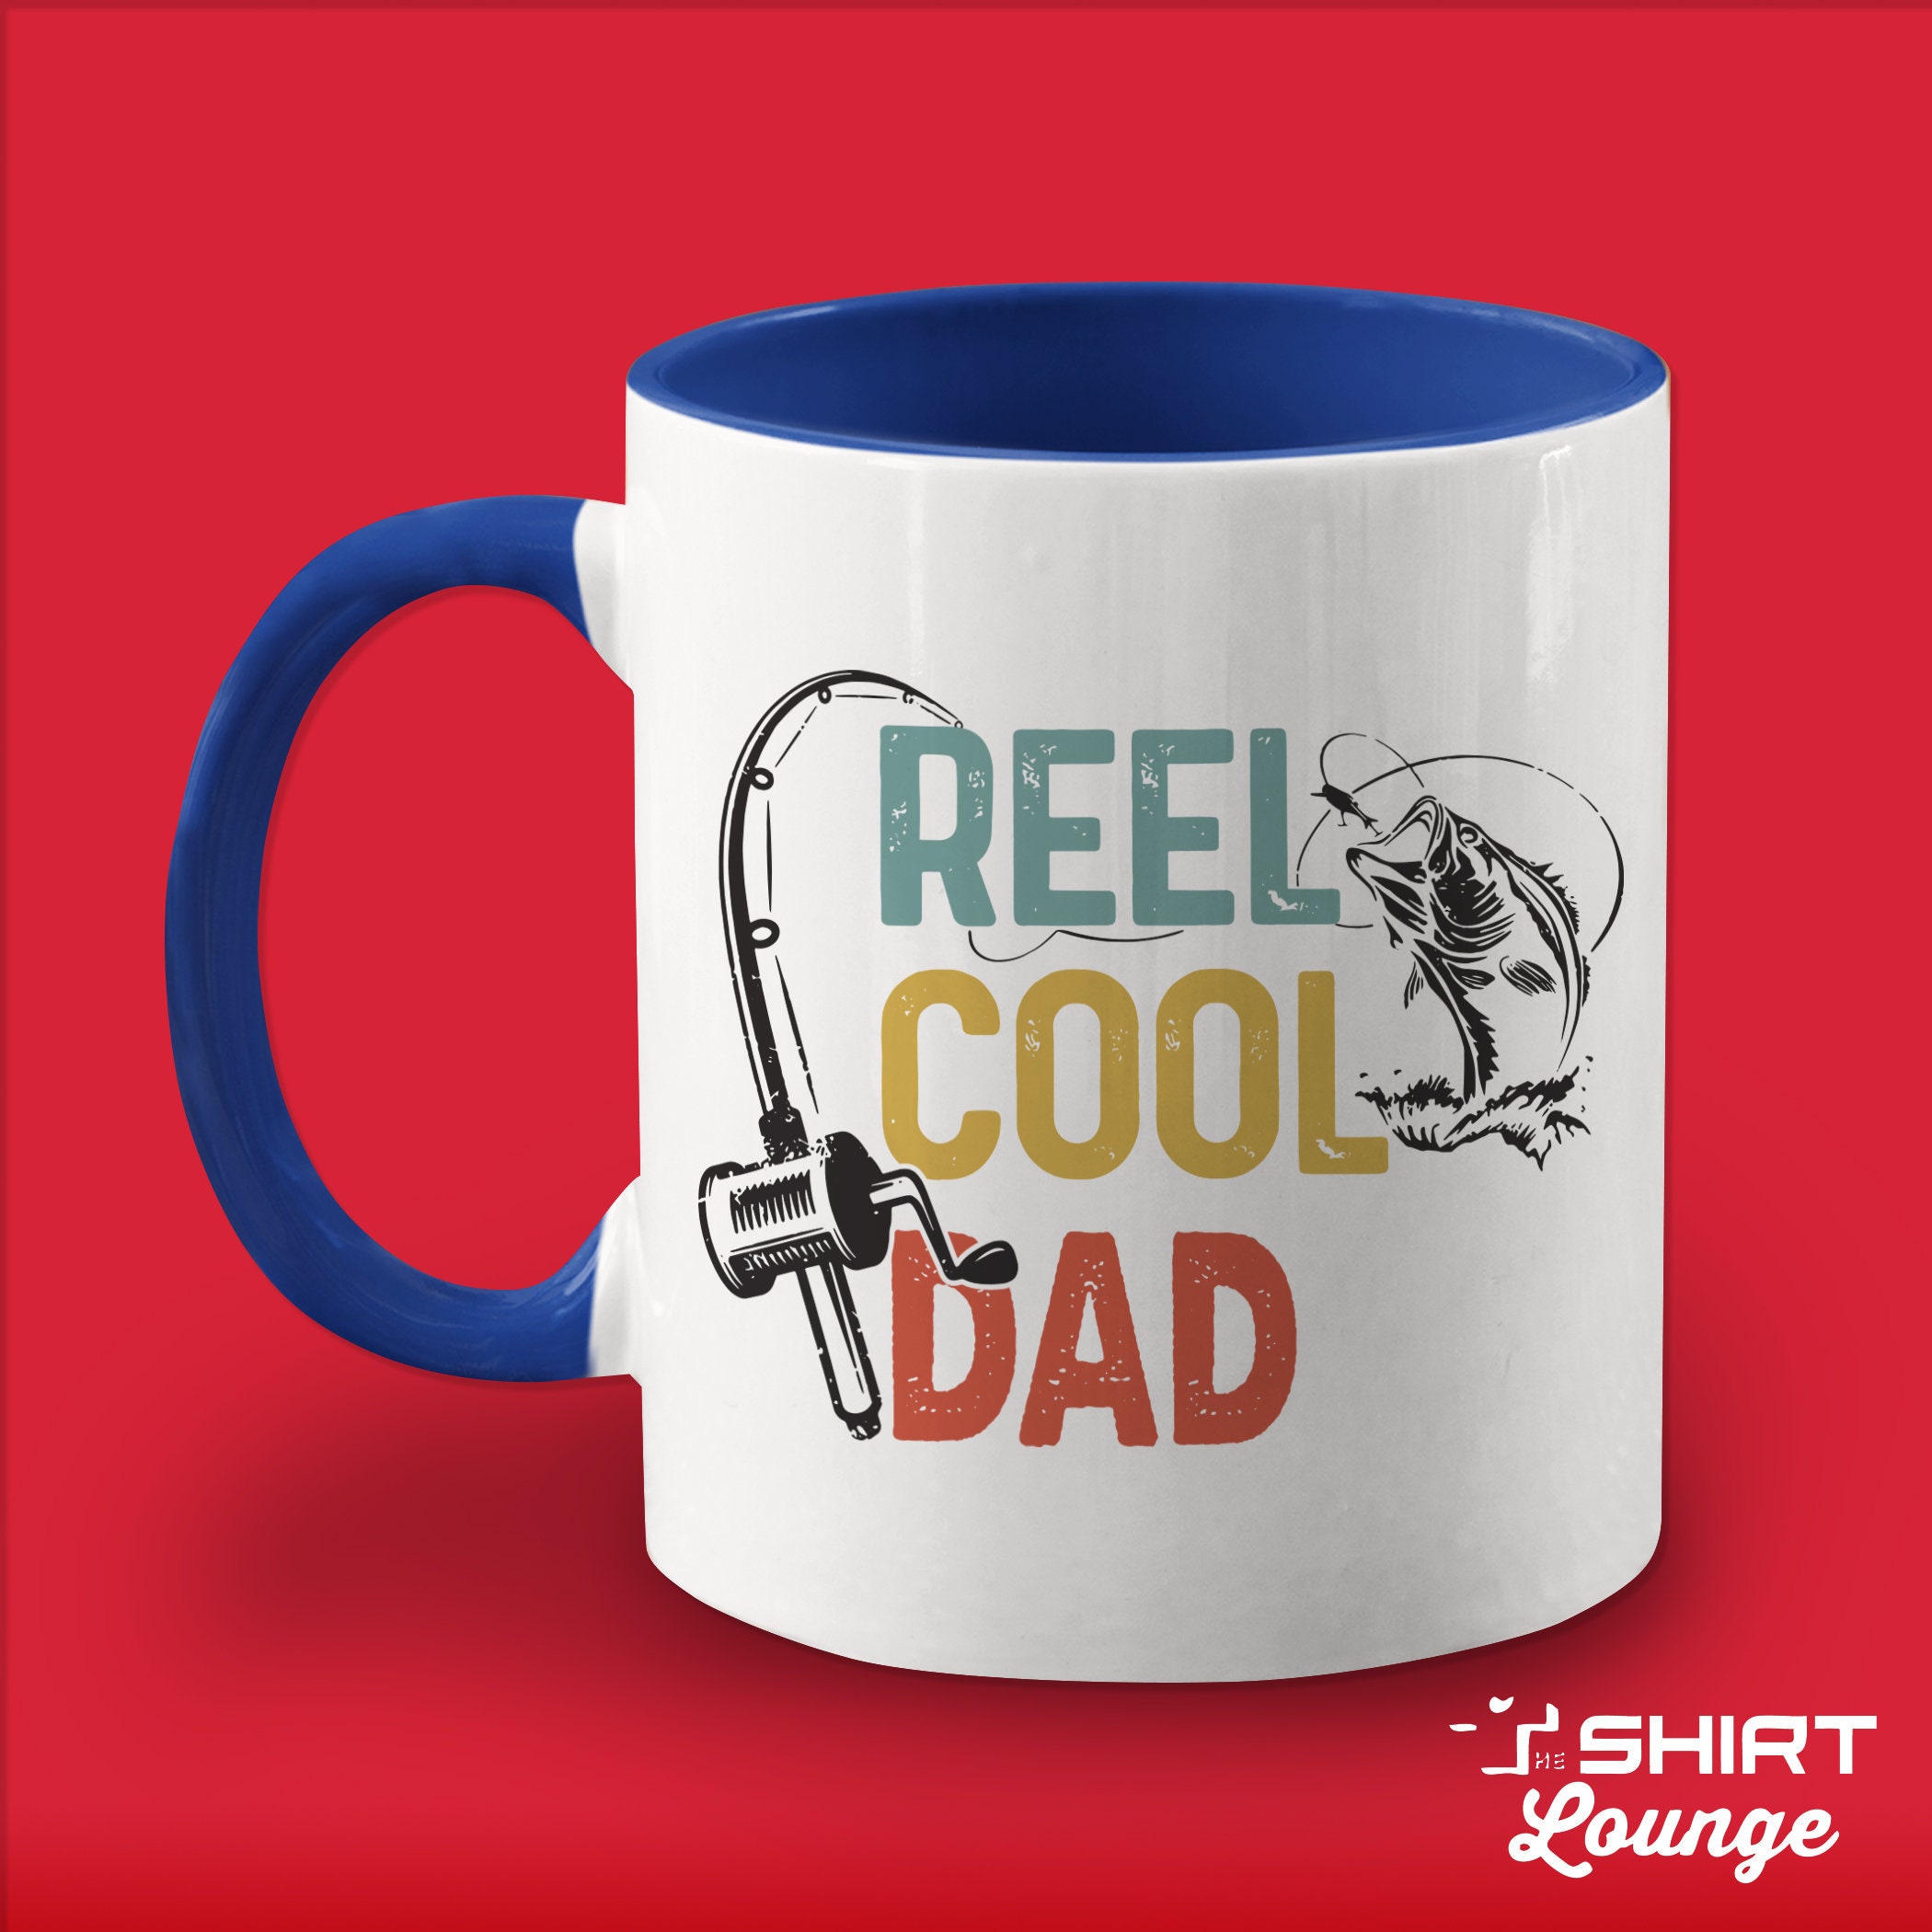 Reel Cool Dad Mug, Dad Fishing Mug, Dad Coffee Cup, Gift for Daddy,  Fisherman Dad, Fishing With Dad, Dad Gift Idea for Father's Day